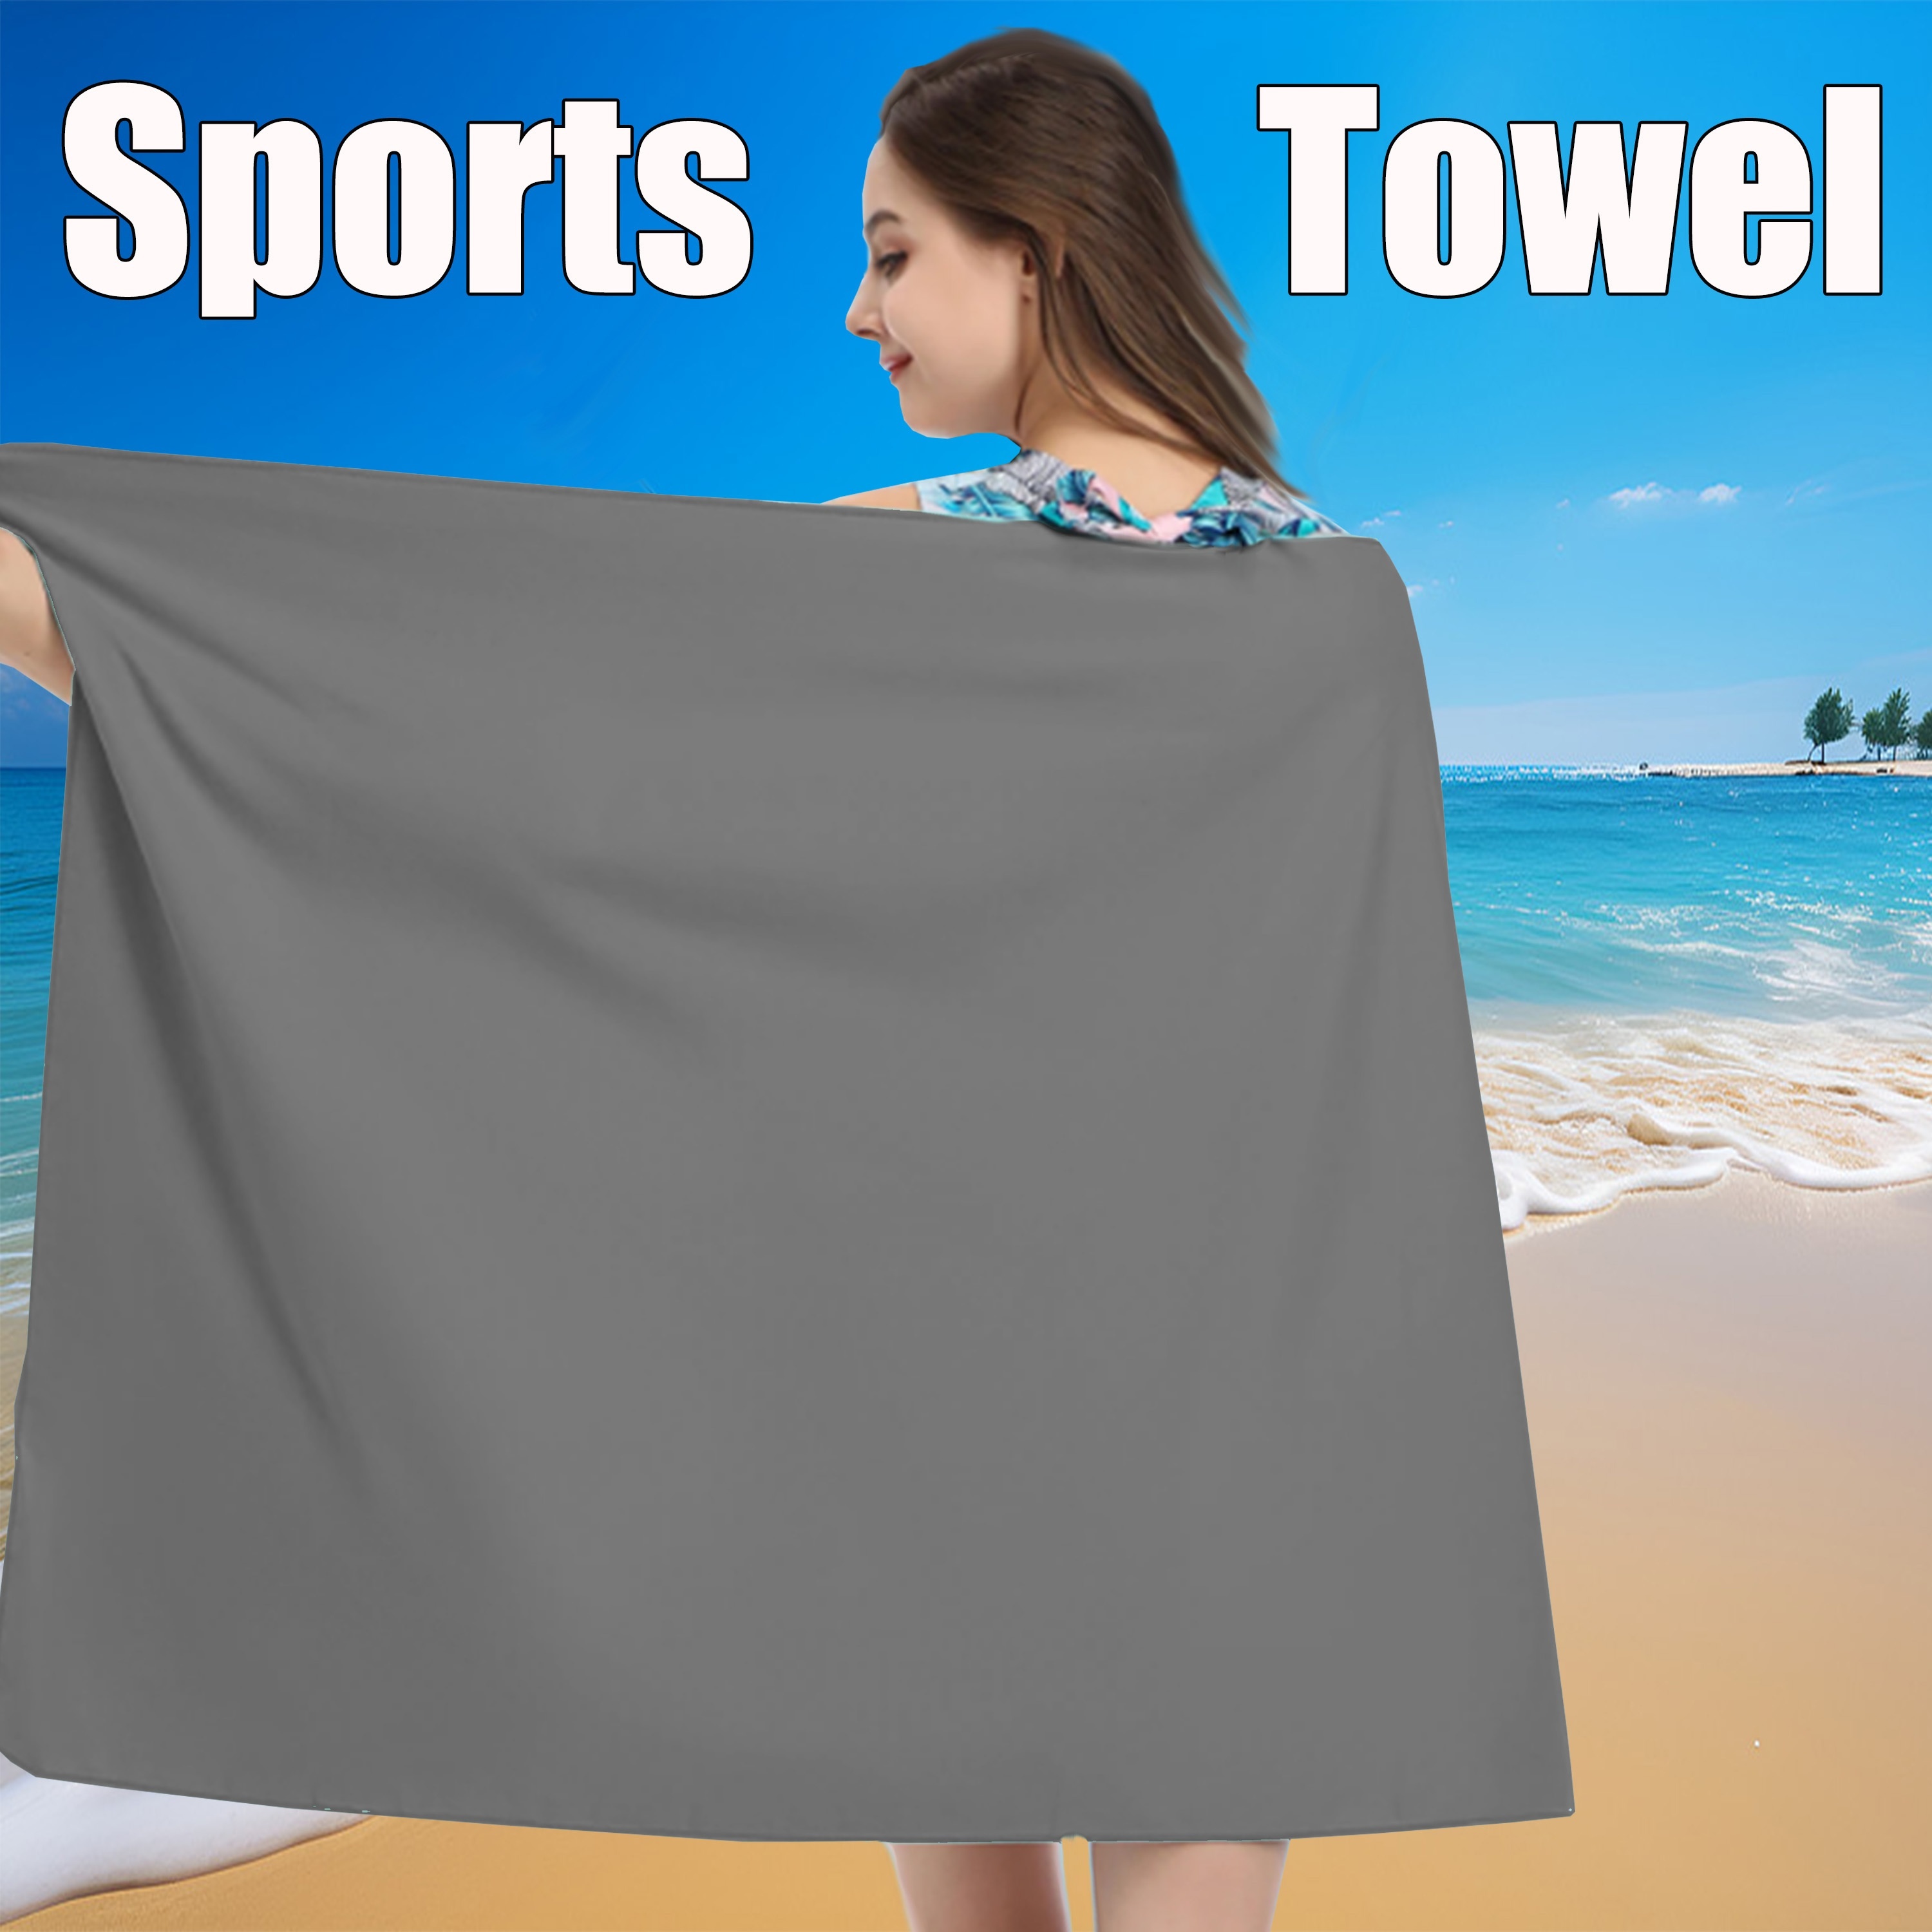 

2pcs Quick-drying Microfiber Sports Towels, Soft Beach Towels, For Outdoor Travel, Camping, Gymnastics, Fitness, Jogging, Swimming, Yoga